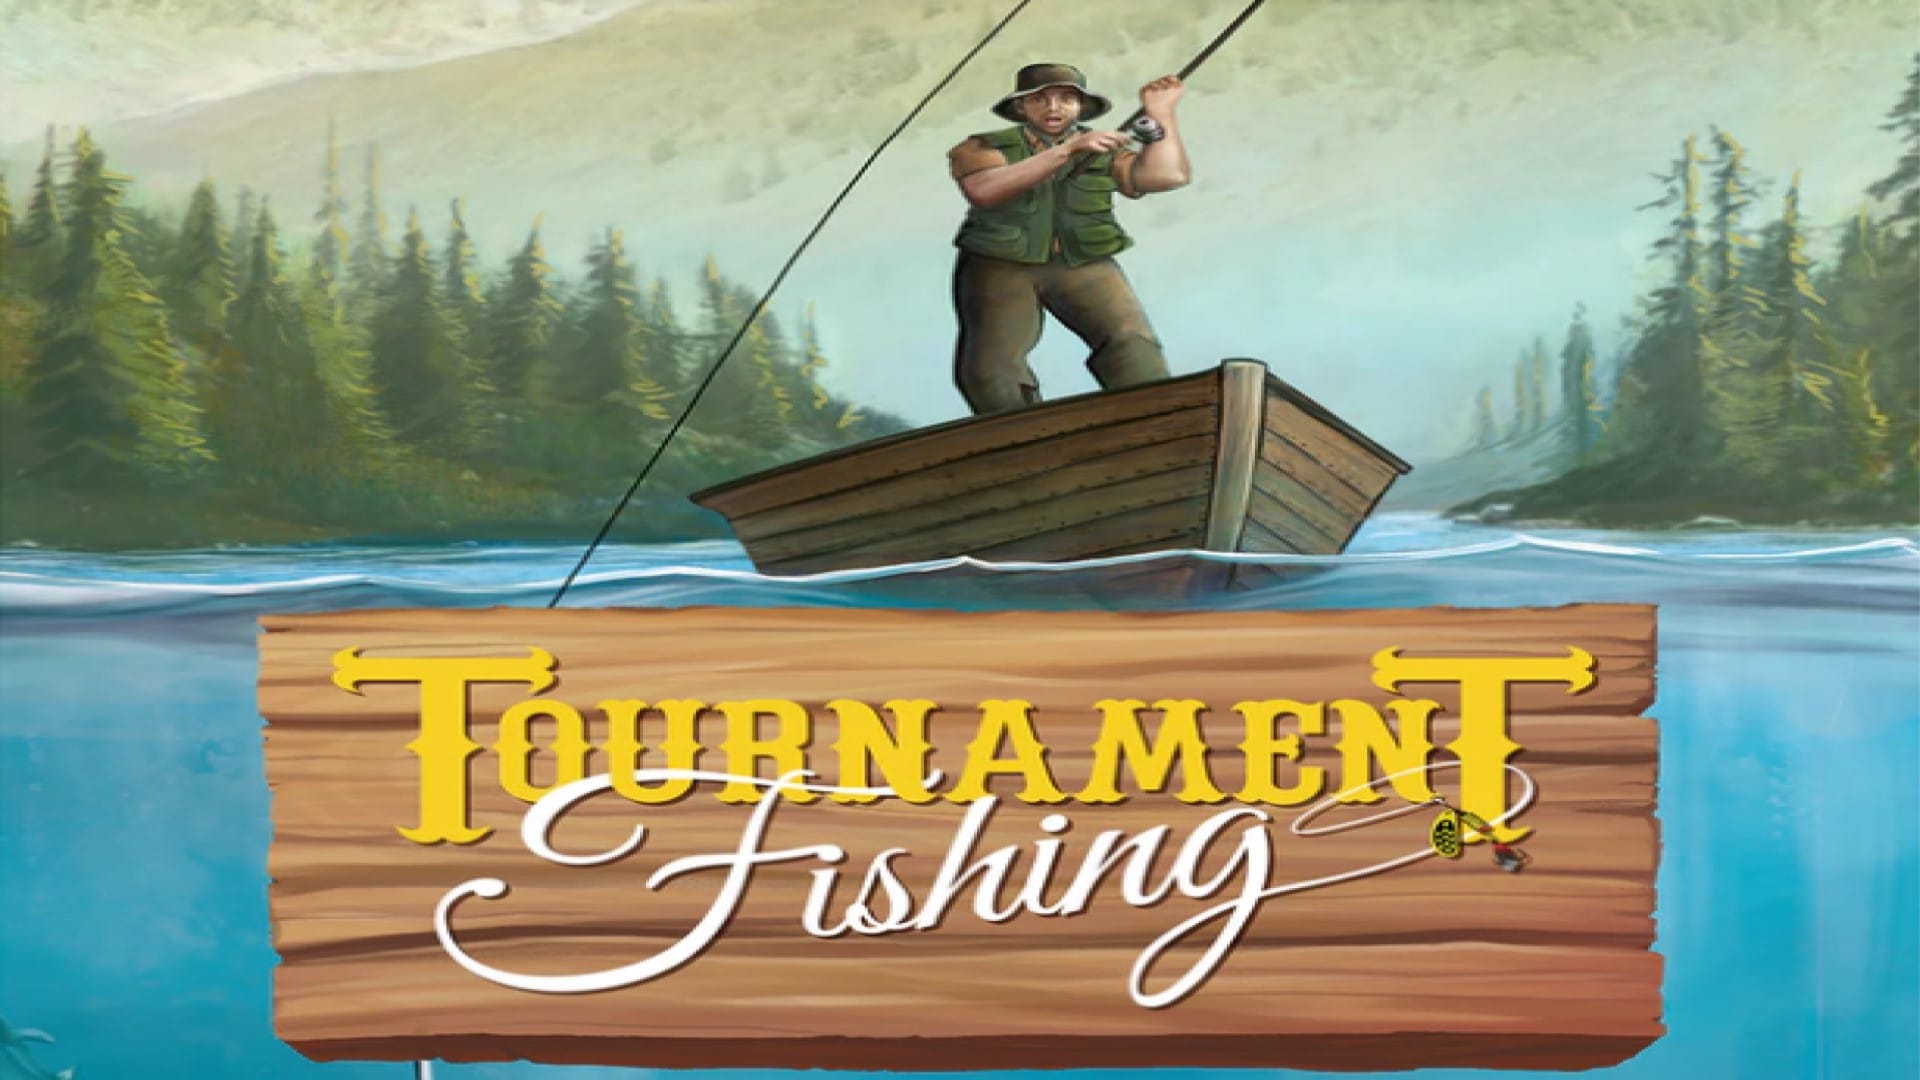 TGG Games And Tournament Fishing Face Backlash over Image